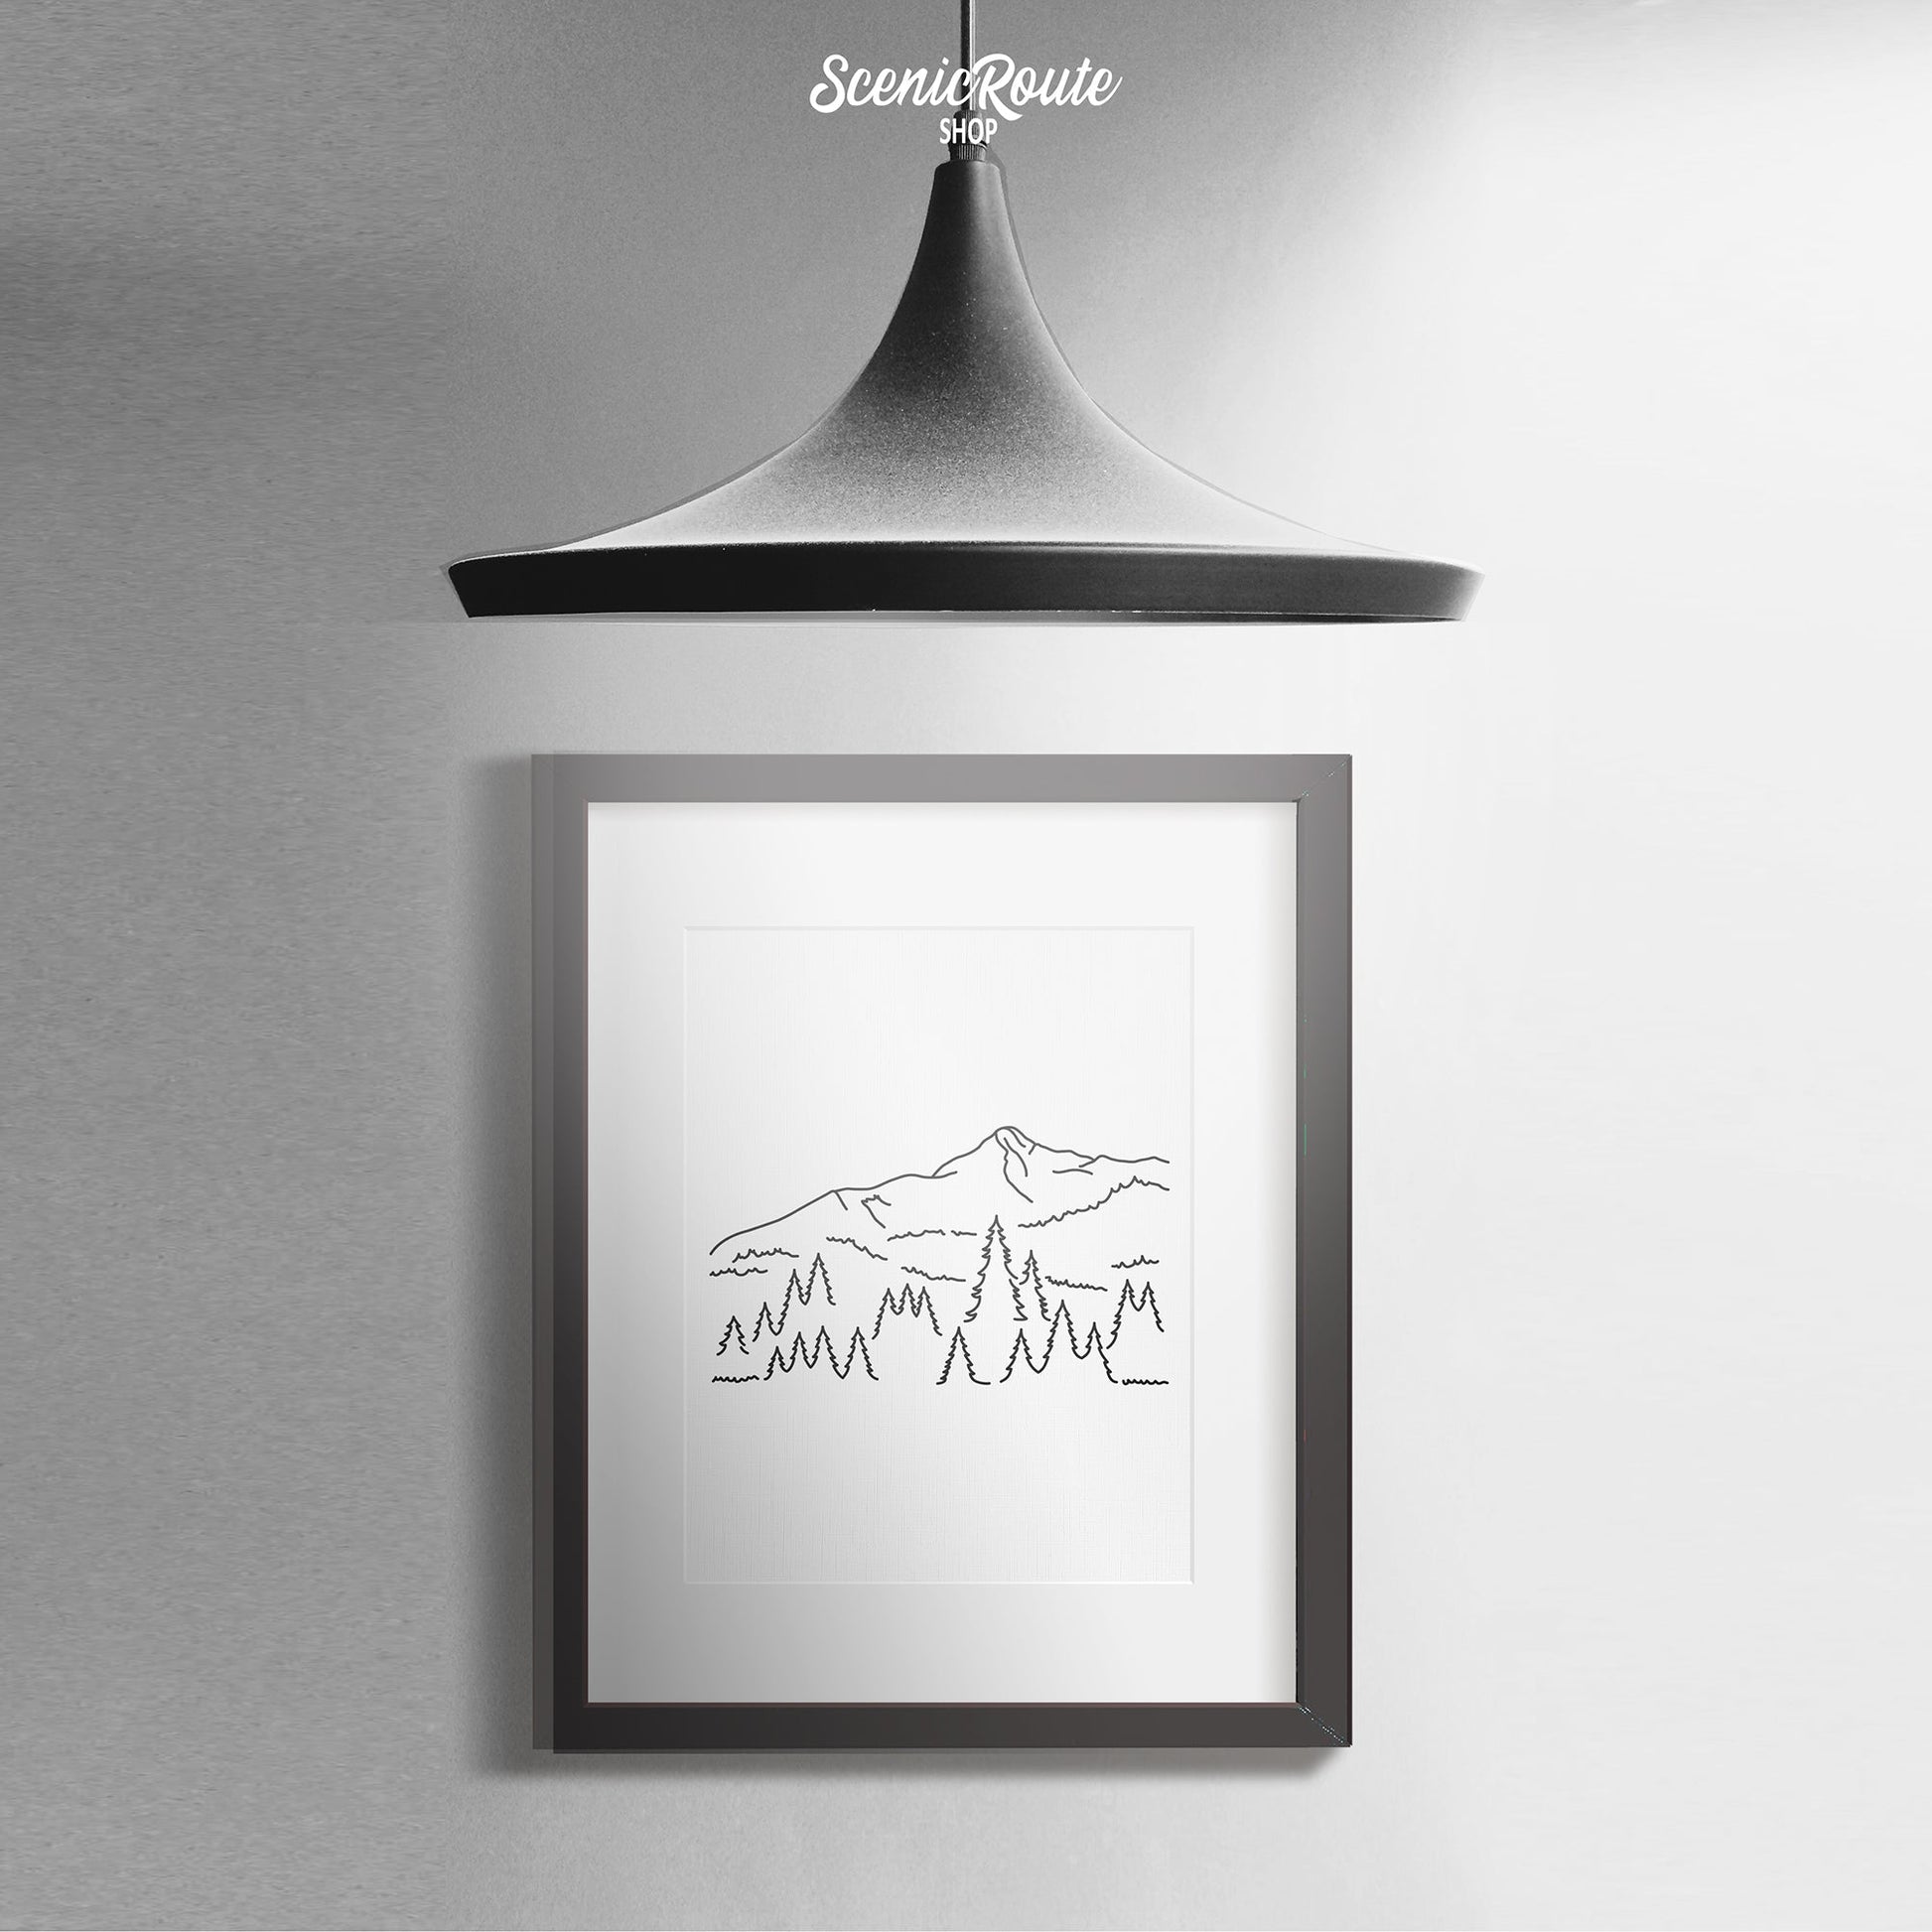 A framed line art drawing of Big Sky Montana with a light hanging above it